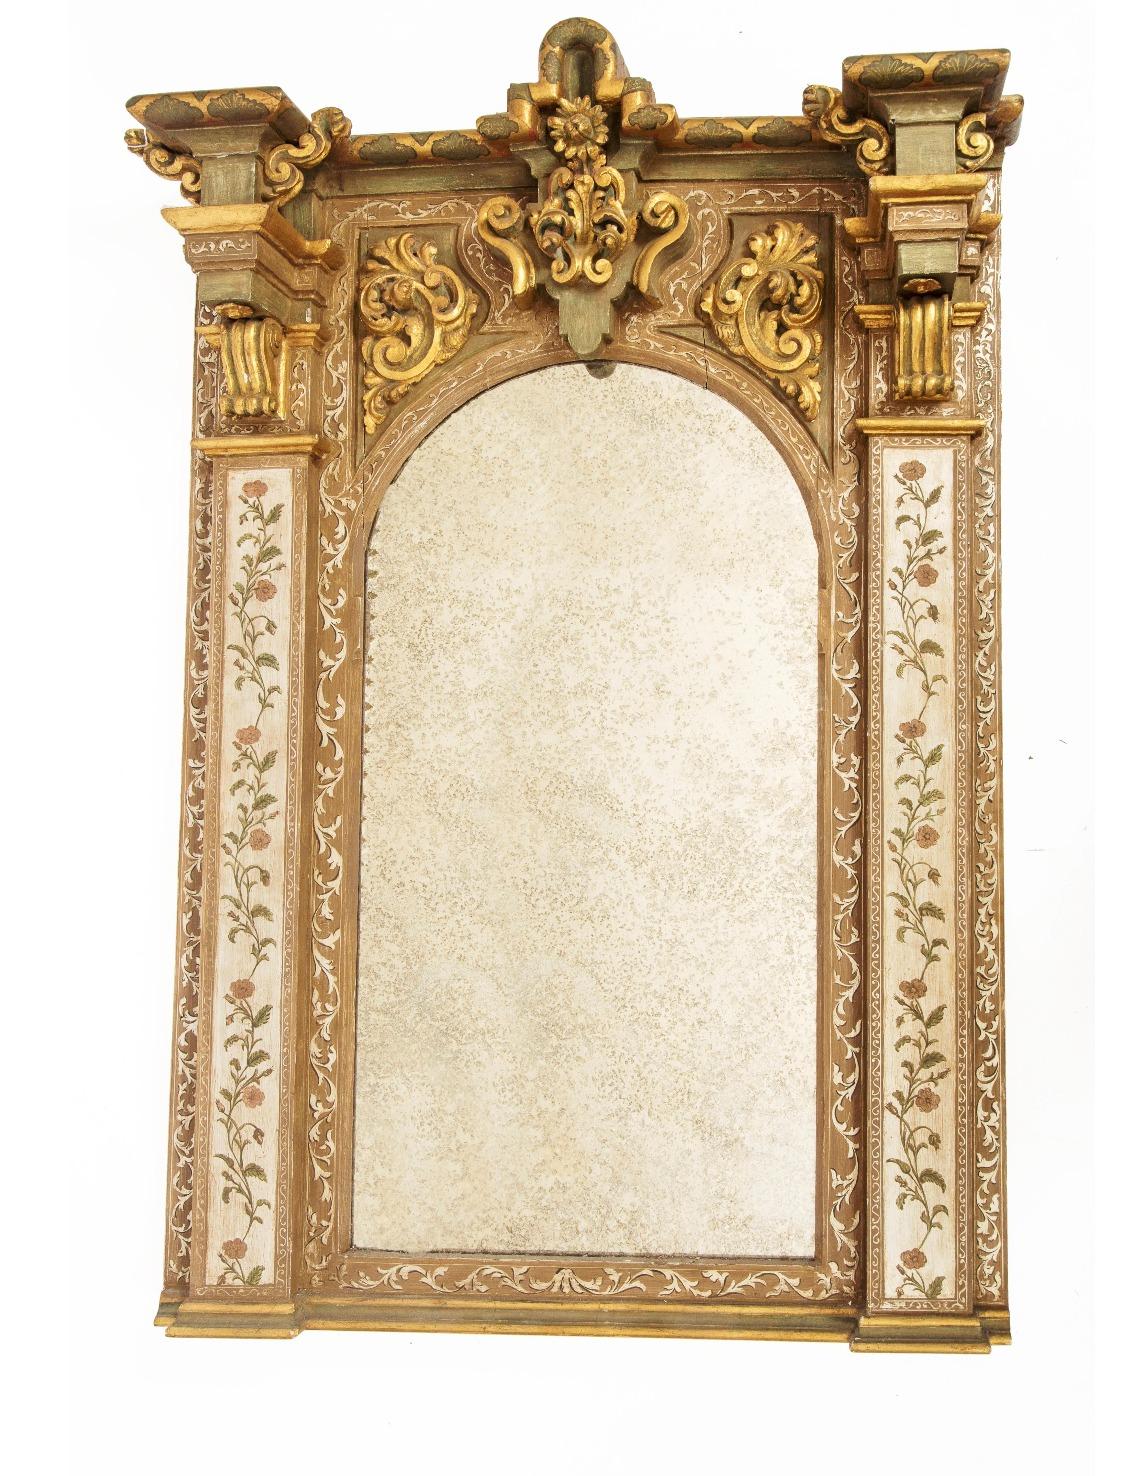 French Baroque mirror carved wood 19th century
Polychrome and gold painted. 
Rectangular body, mirror top with round neckline. 
Measures: H.: 175 cm, W.: 105 cm, D.: 24 cm.
Very good condition.
  